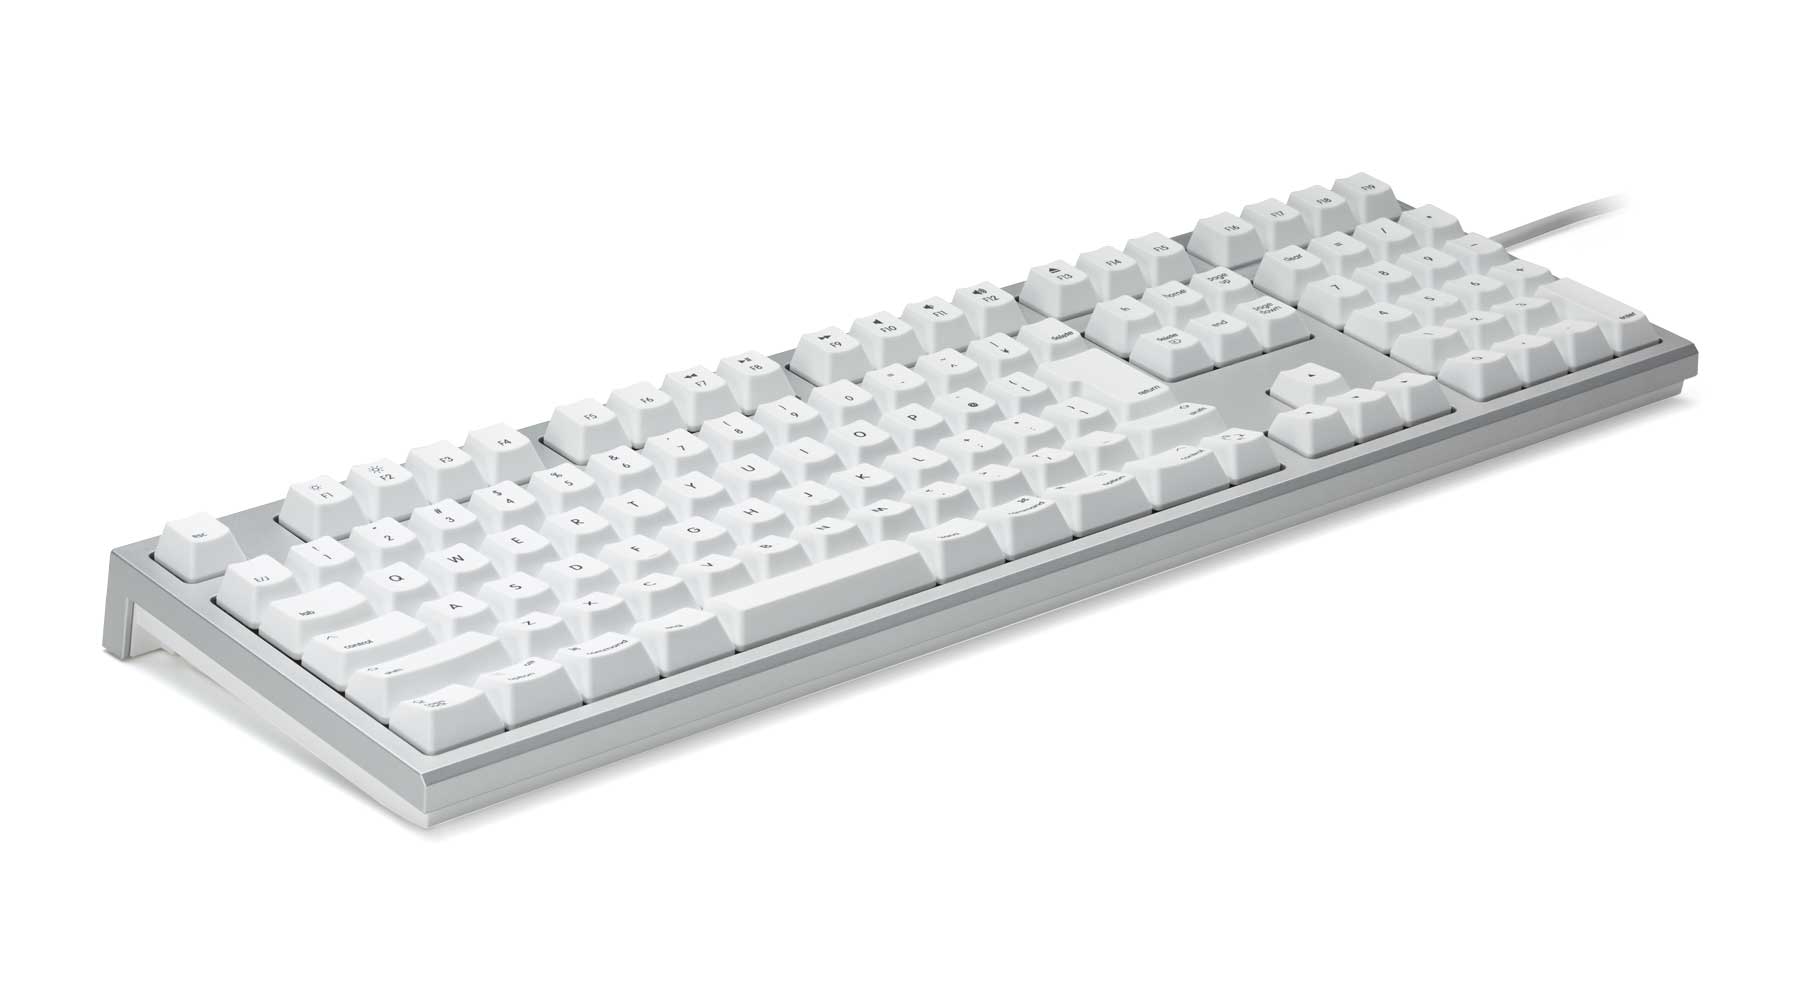 realforce r2 for mac US配列